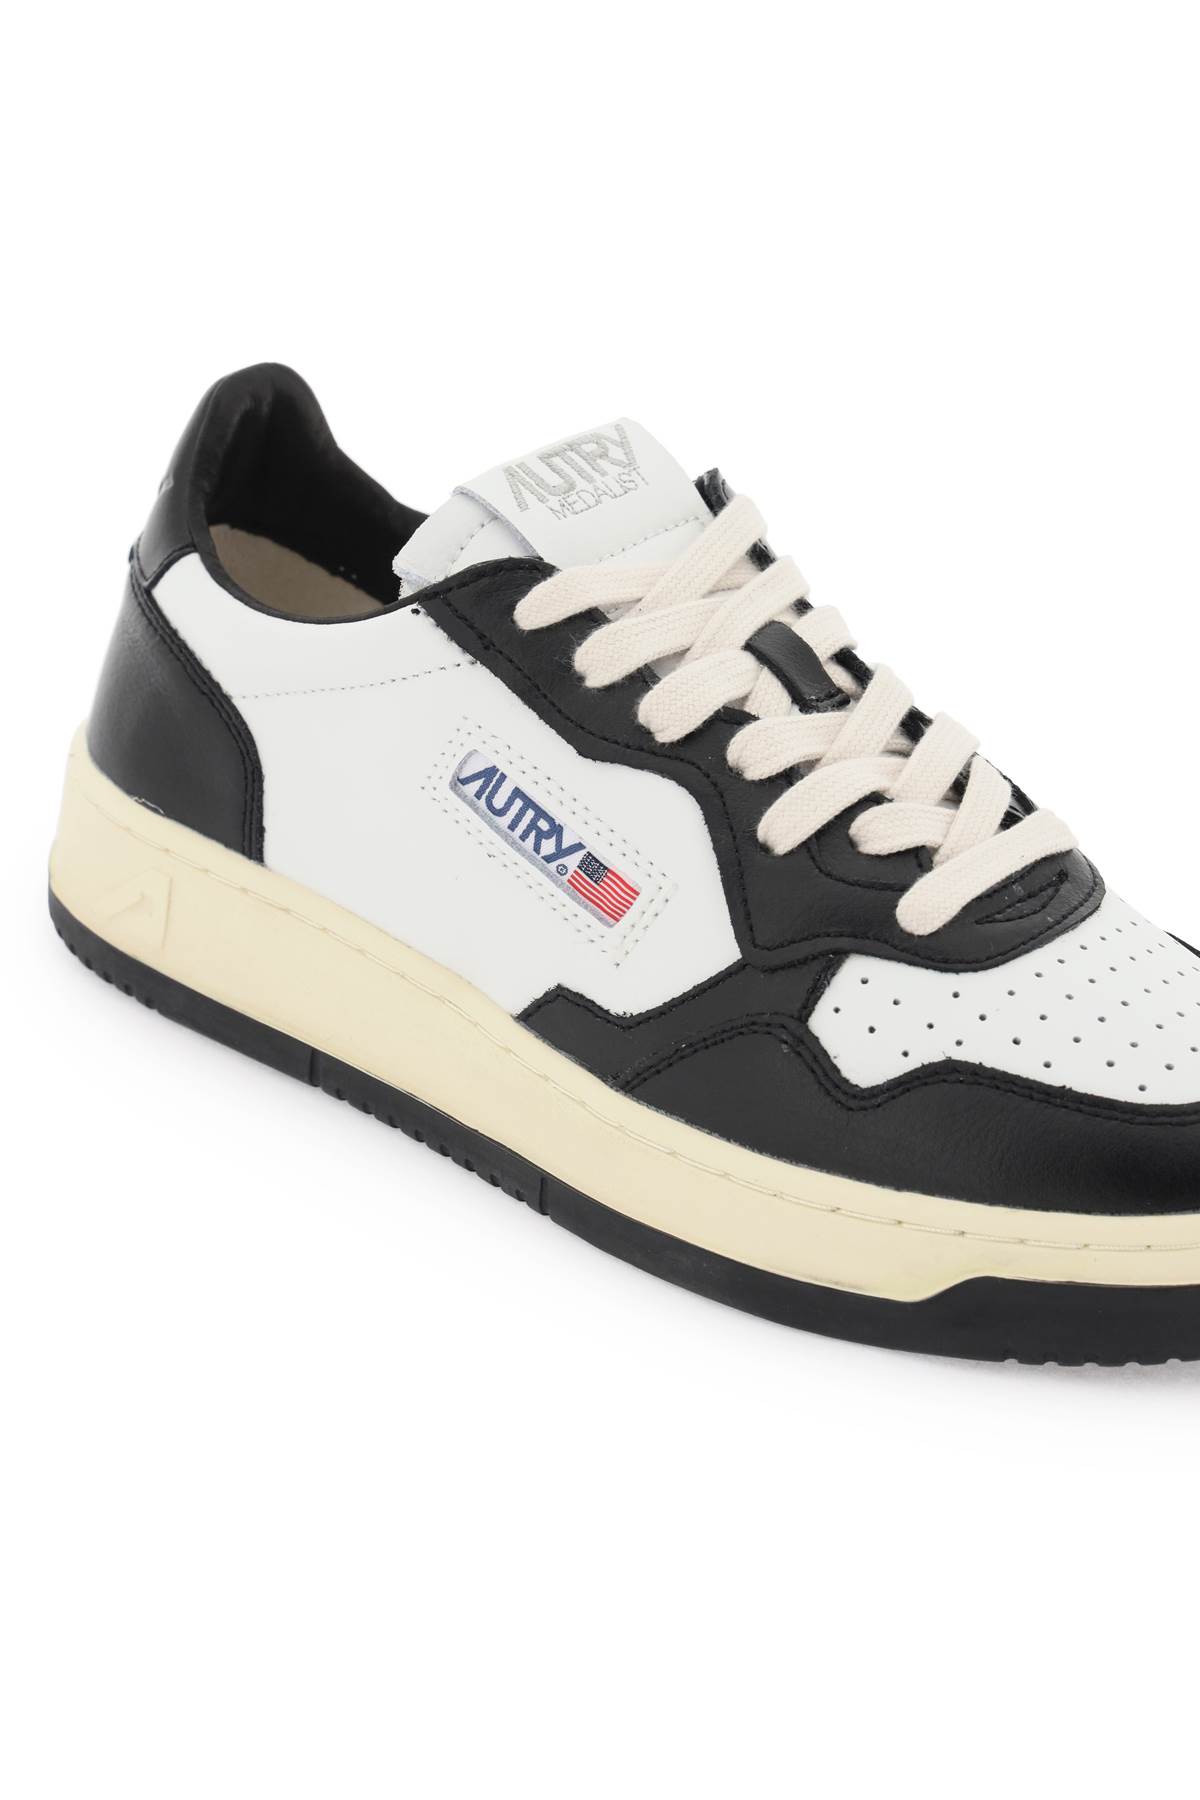 Shop Autry Medalist Low Sneakers In White Black (white)